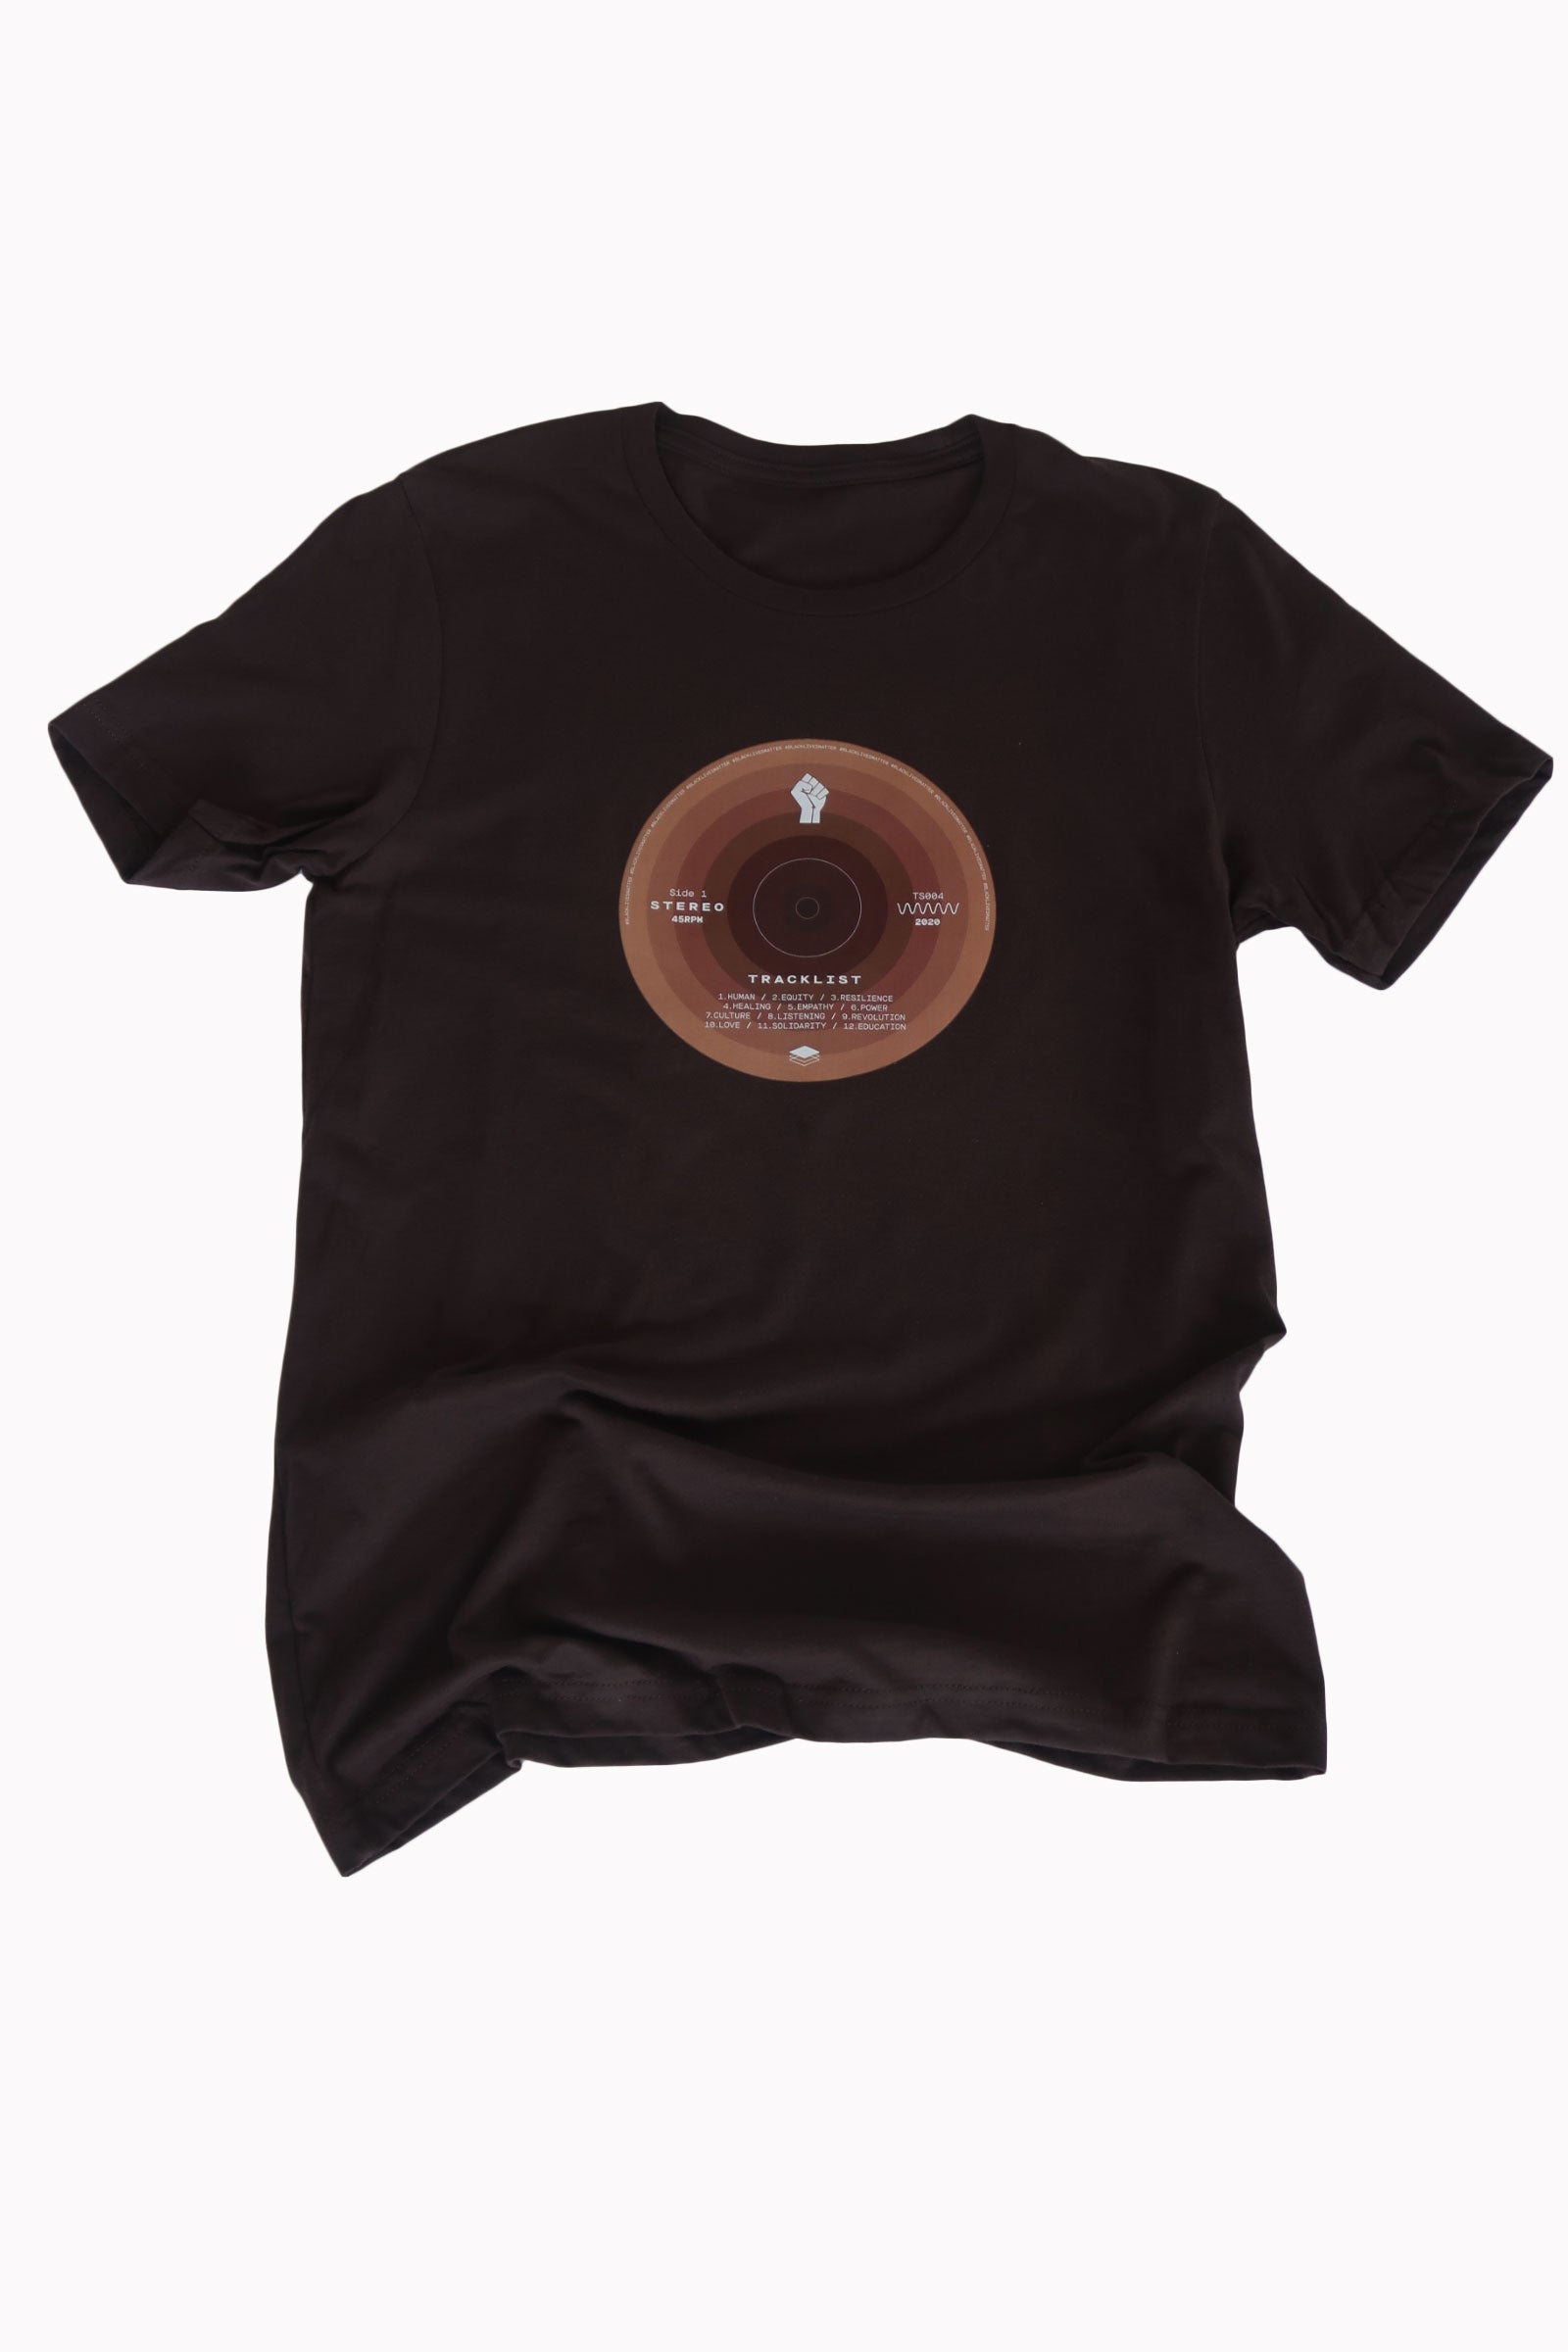 BLM Record Shirt in Brown - Trunk Series